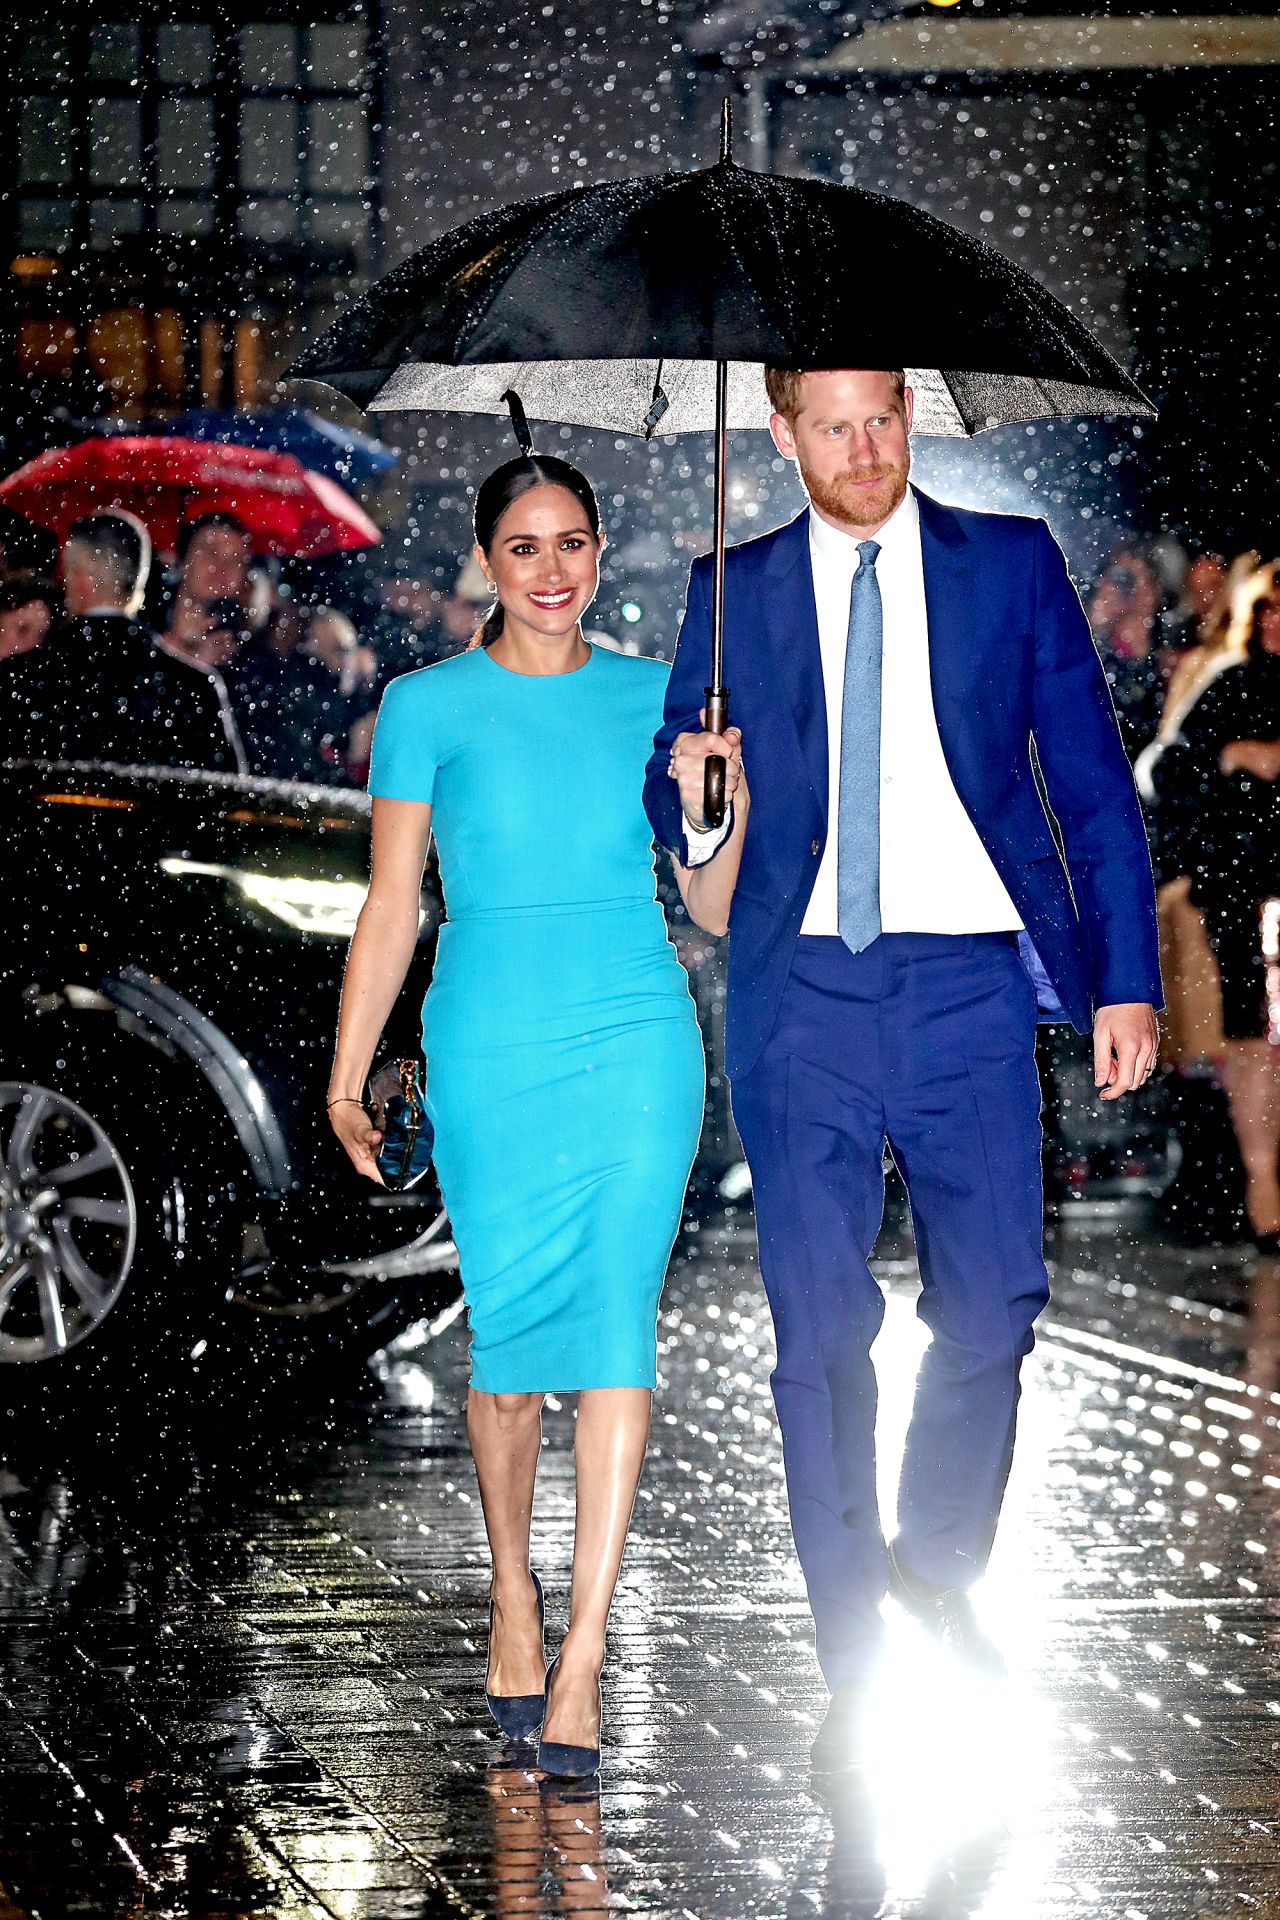 Meghan, Duchess of Sussex wears Victoria Beckham to attend the Endeavour Fund Awards.